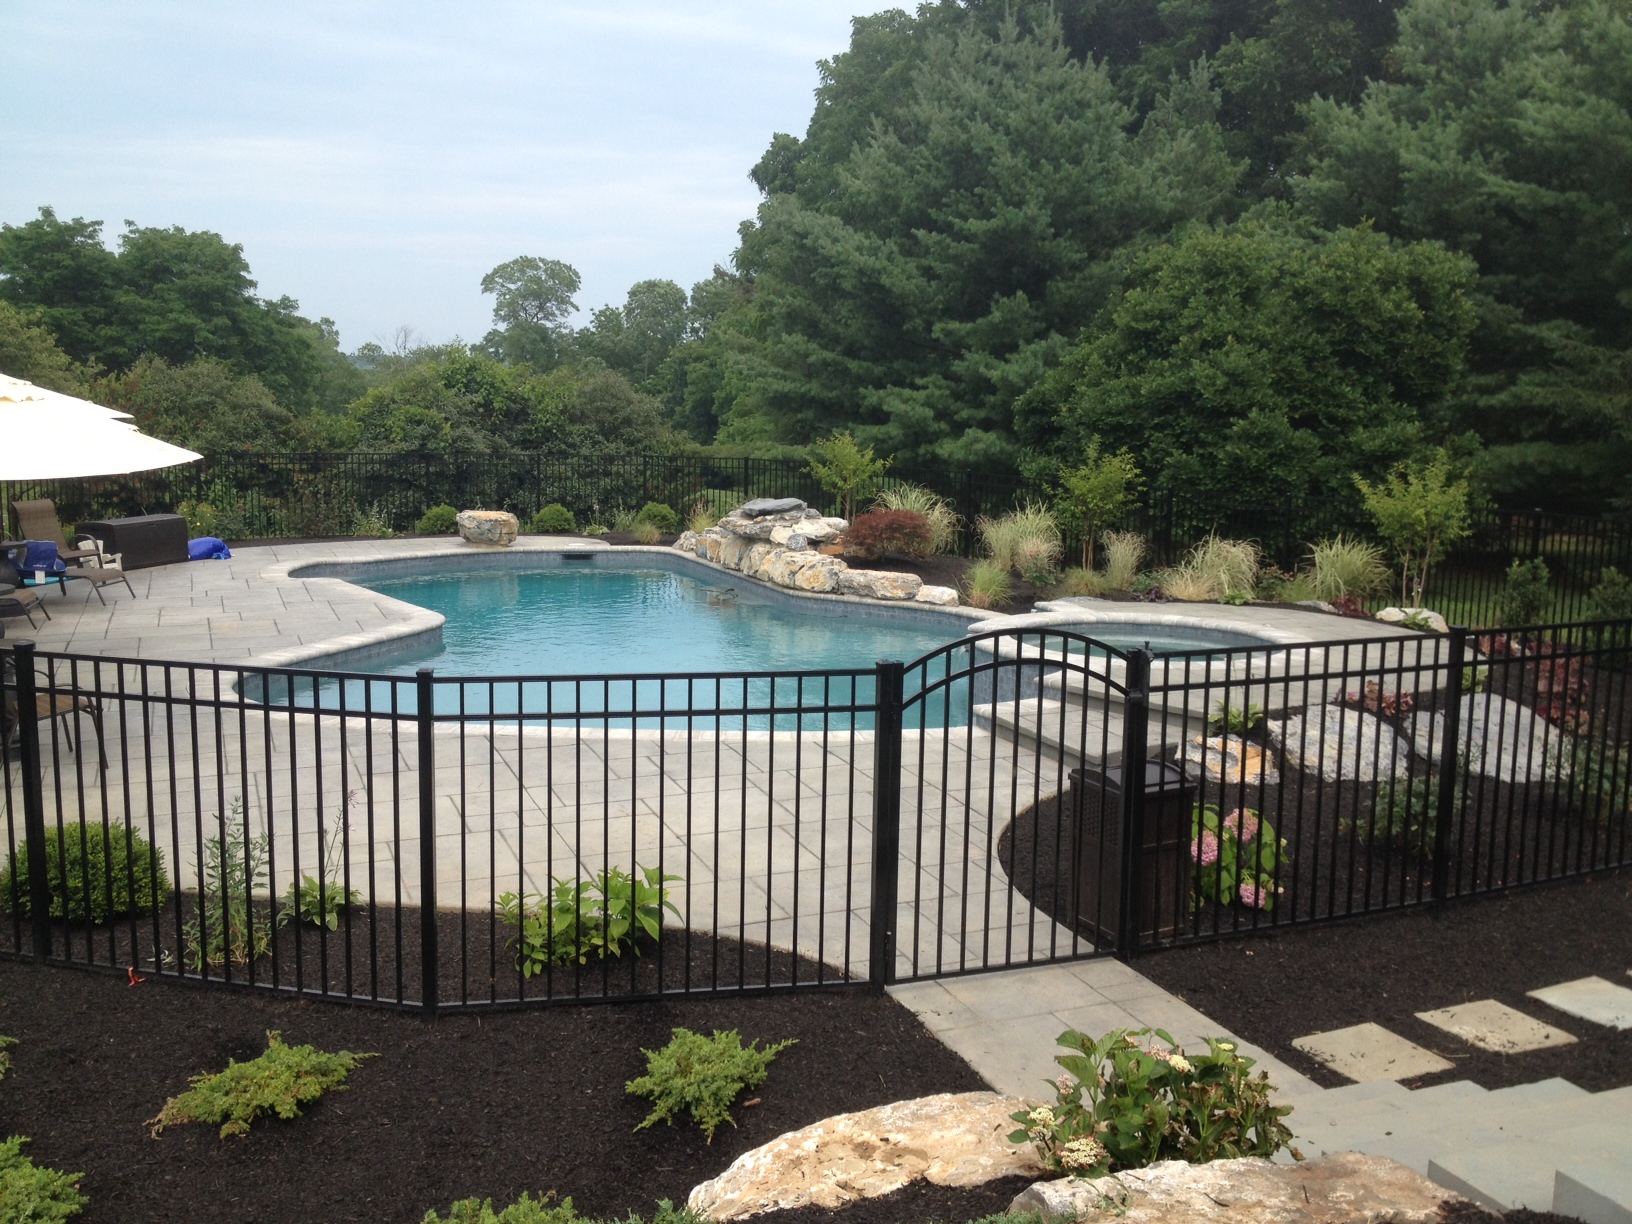 Tag Archive for "Pool Fences" - Landscaping Company NJ & PA | Custom